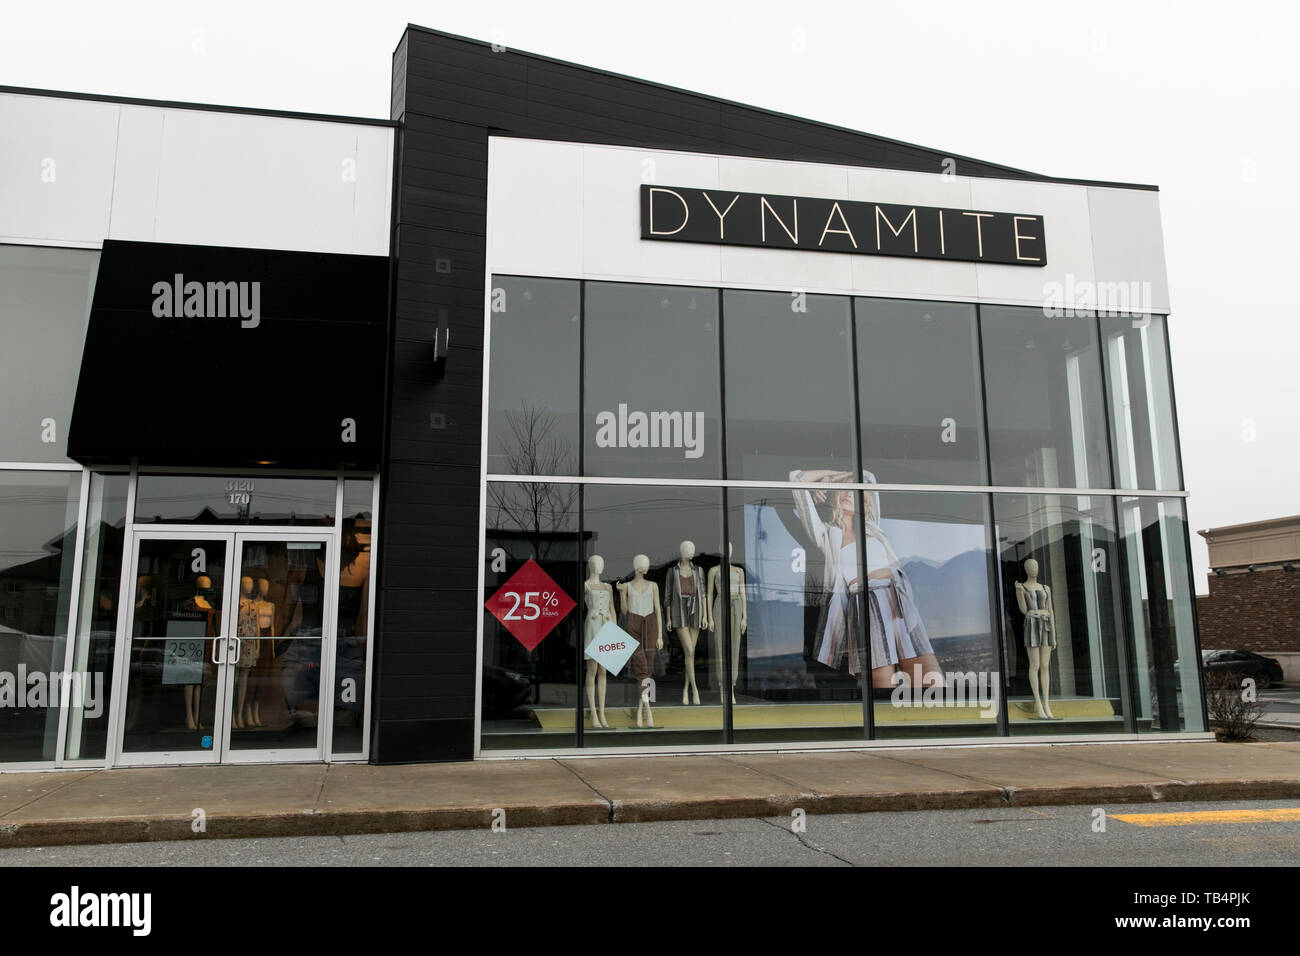 A logo sign outside of a Dynamite retail store location in Vaudreuil-Dorion, Quebec, Canada, on April 21, 2019. Stock Photo